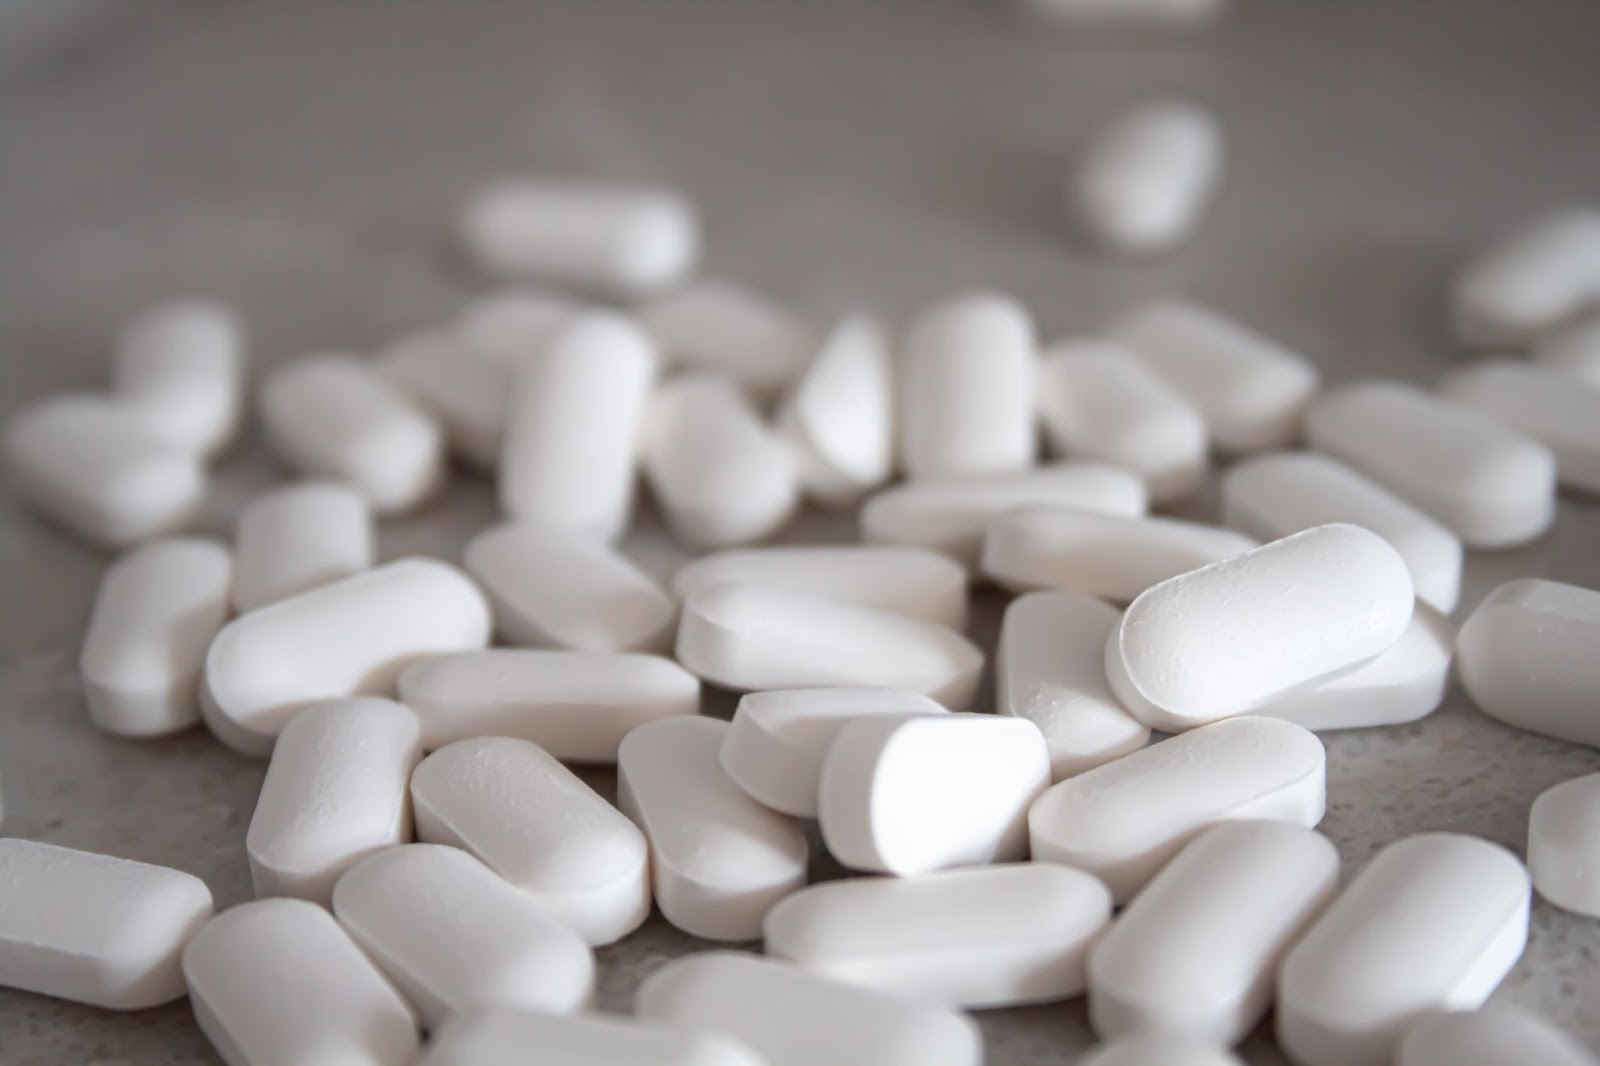 Are There Any Other Side Effects Of Acetaminophen?